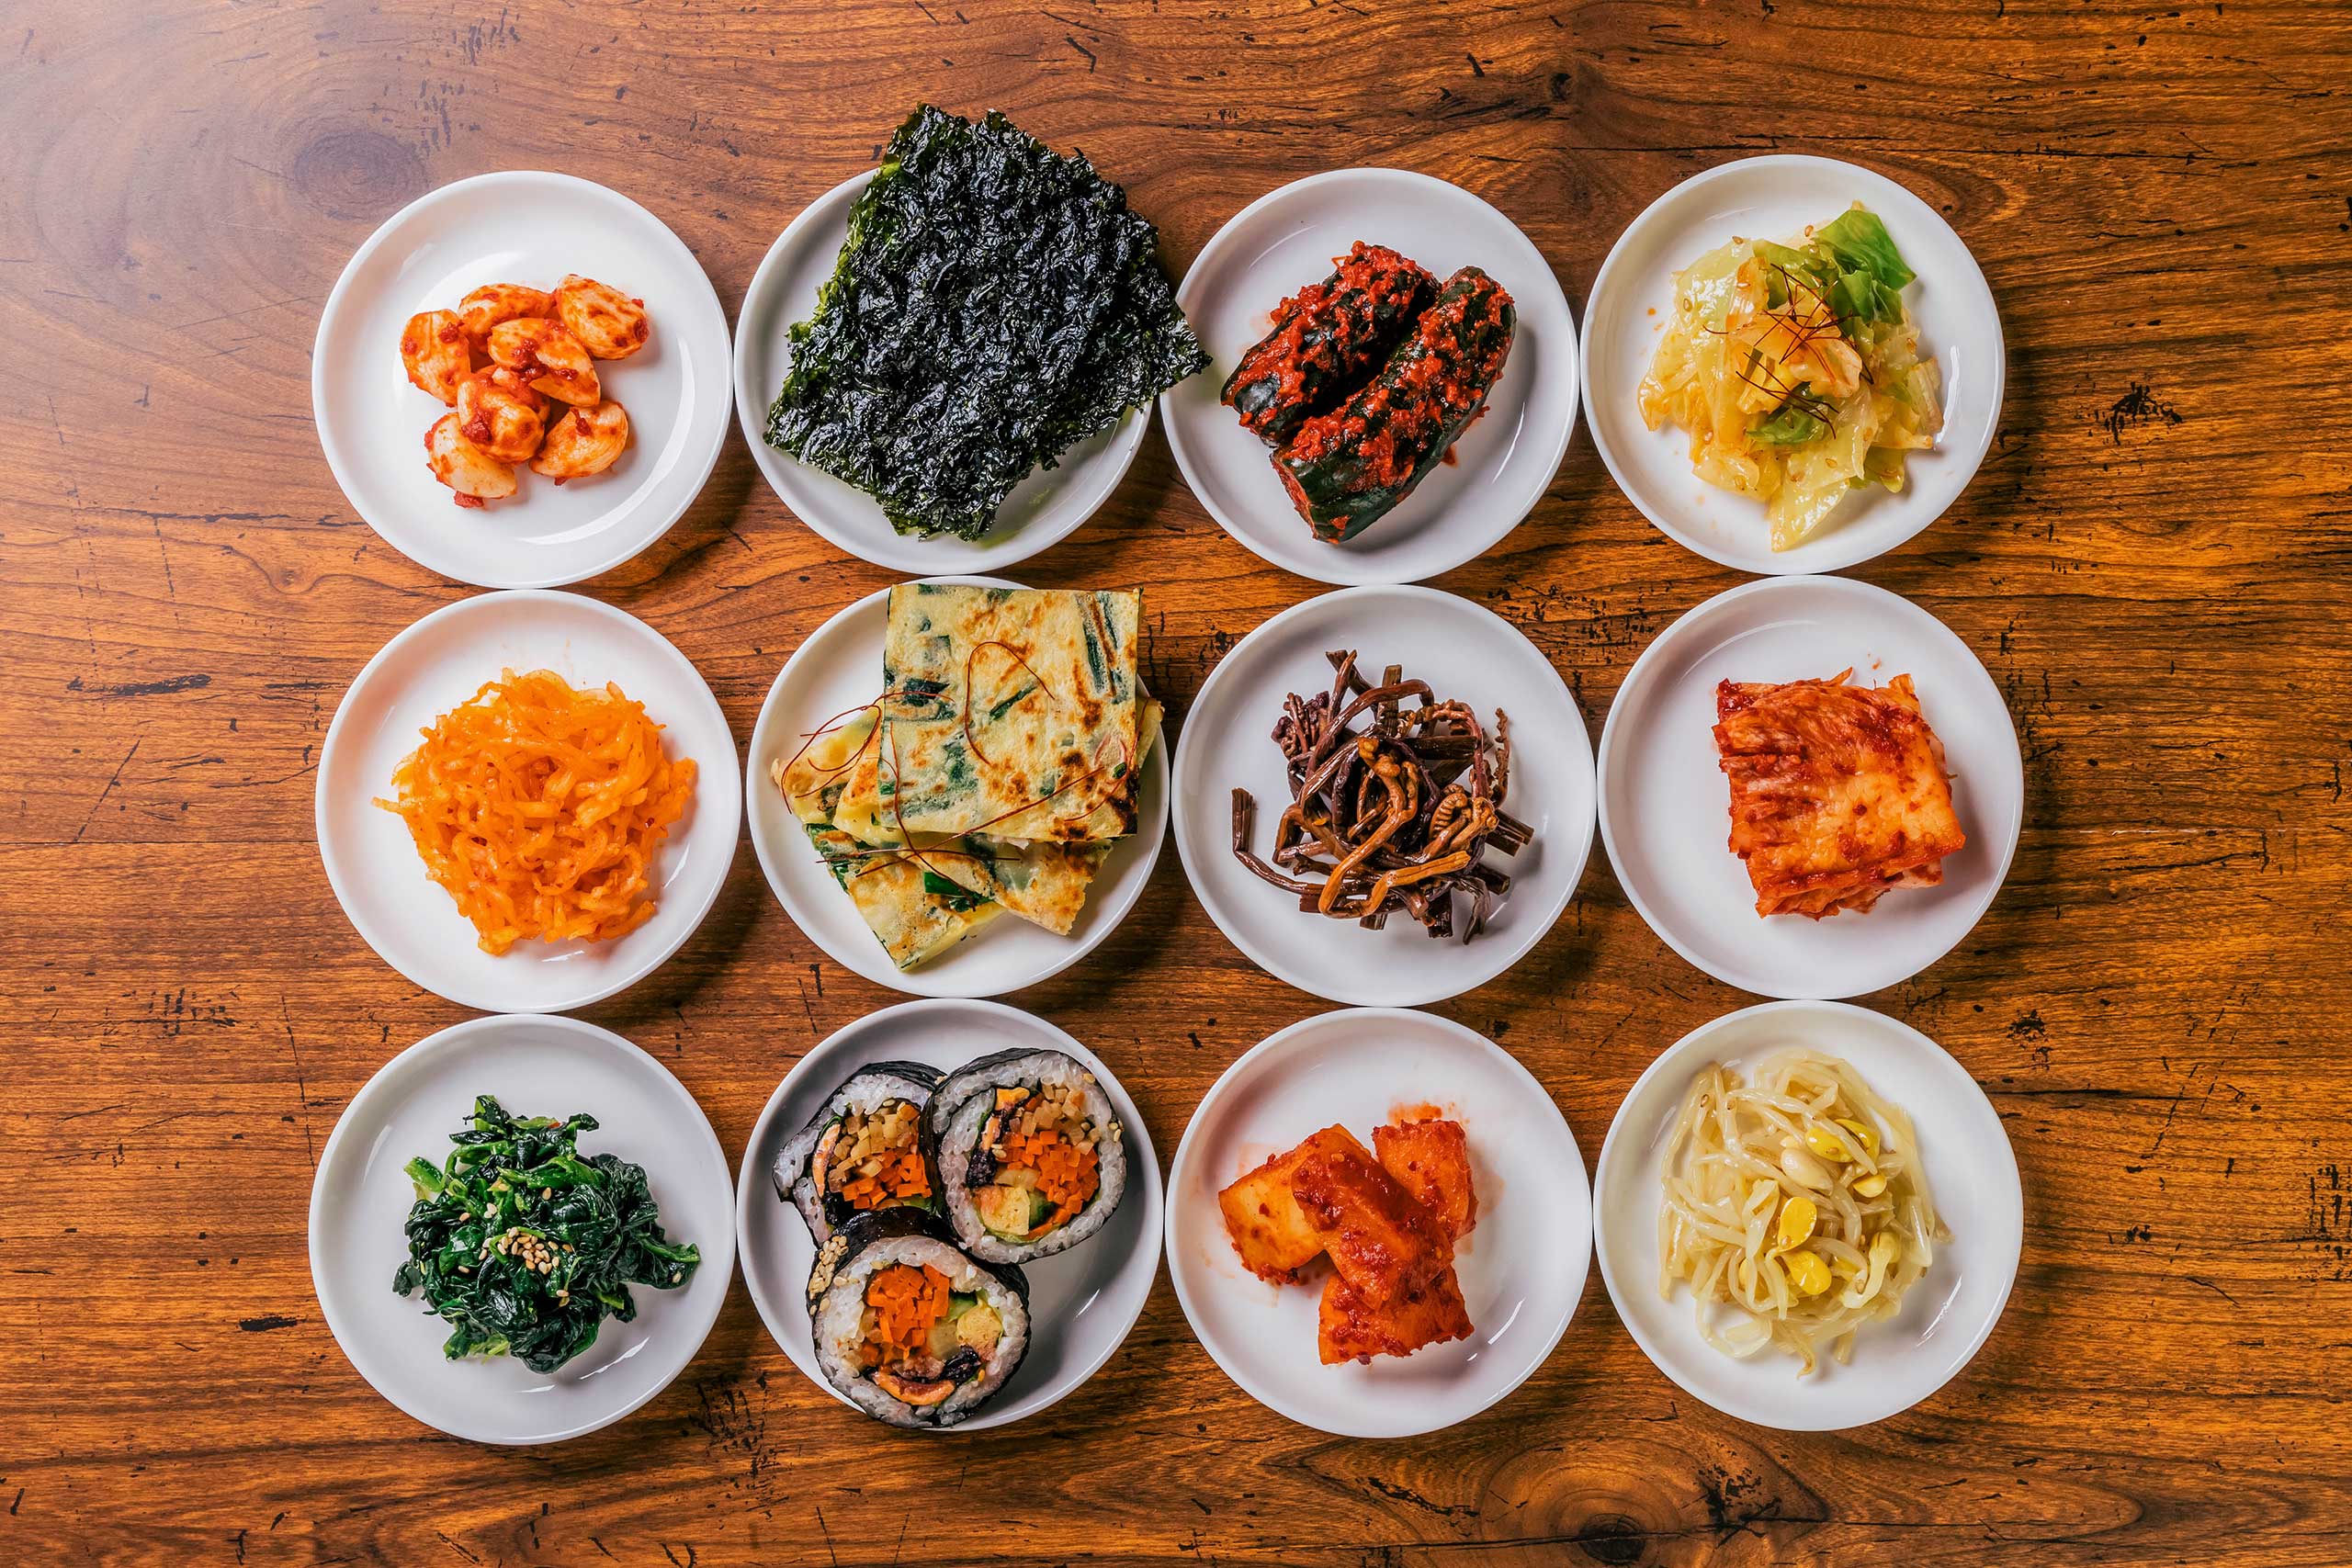 Popular Korean Dishes For Healthy Living